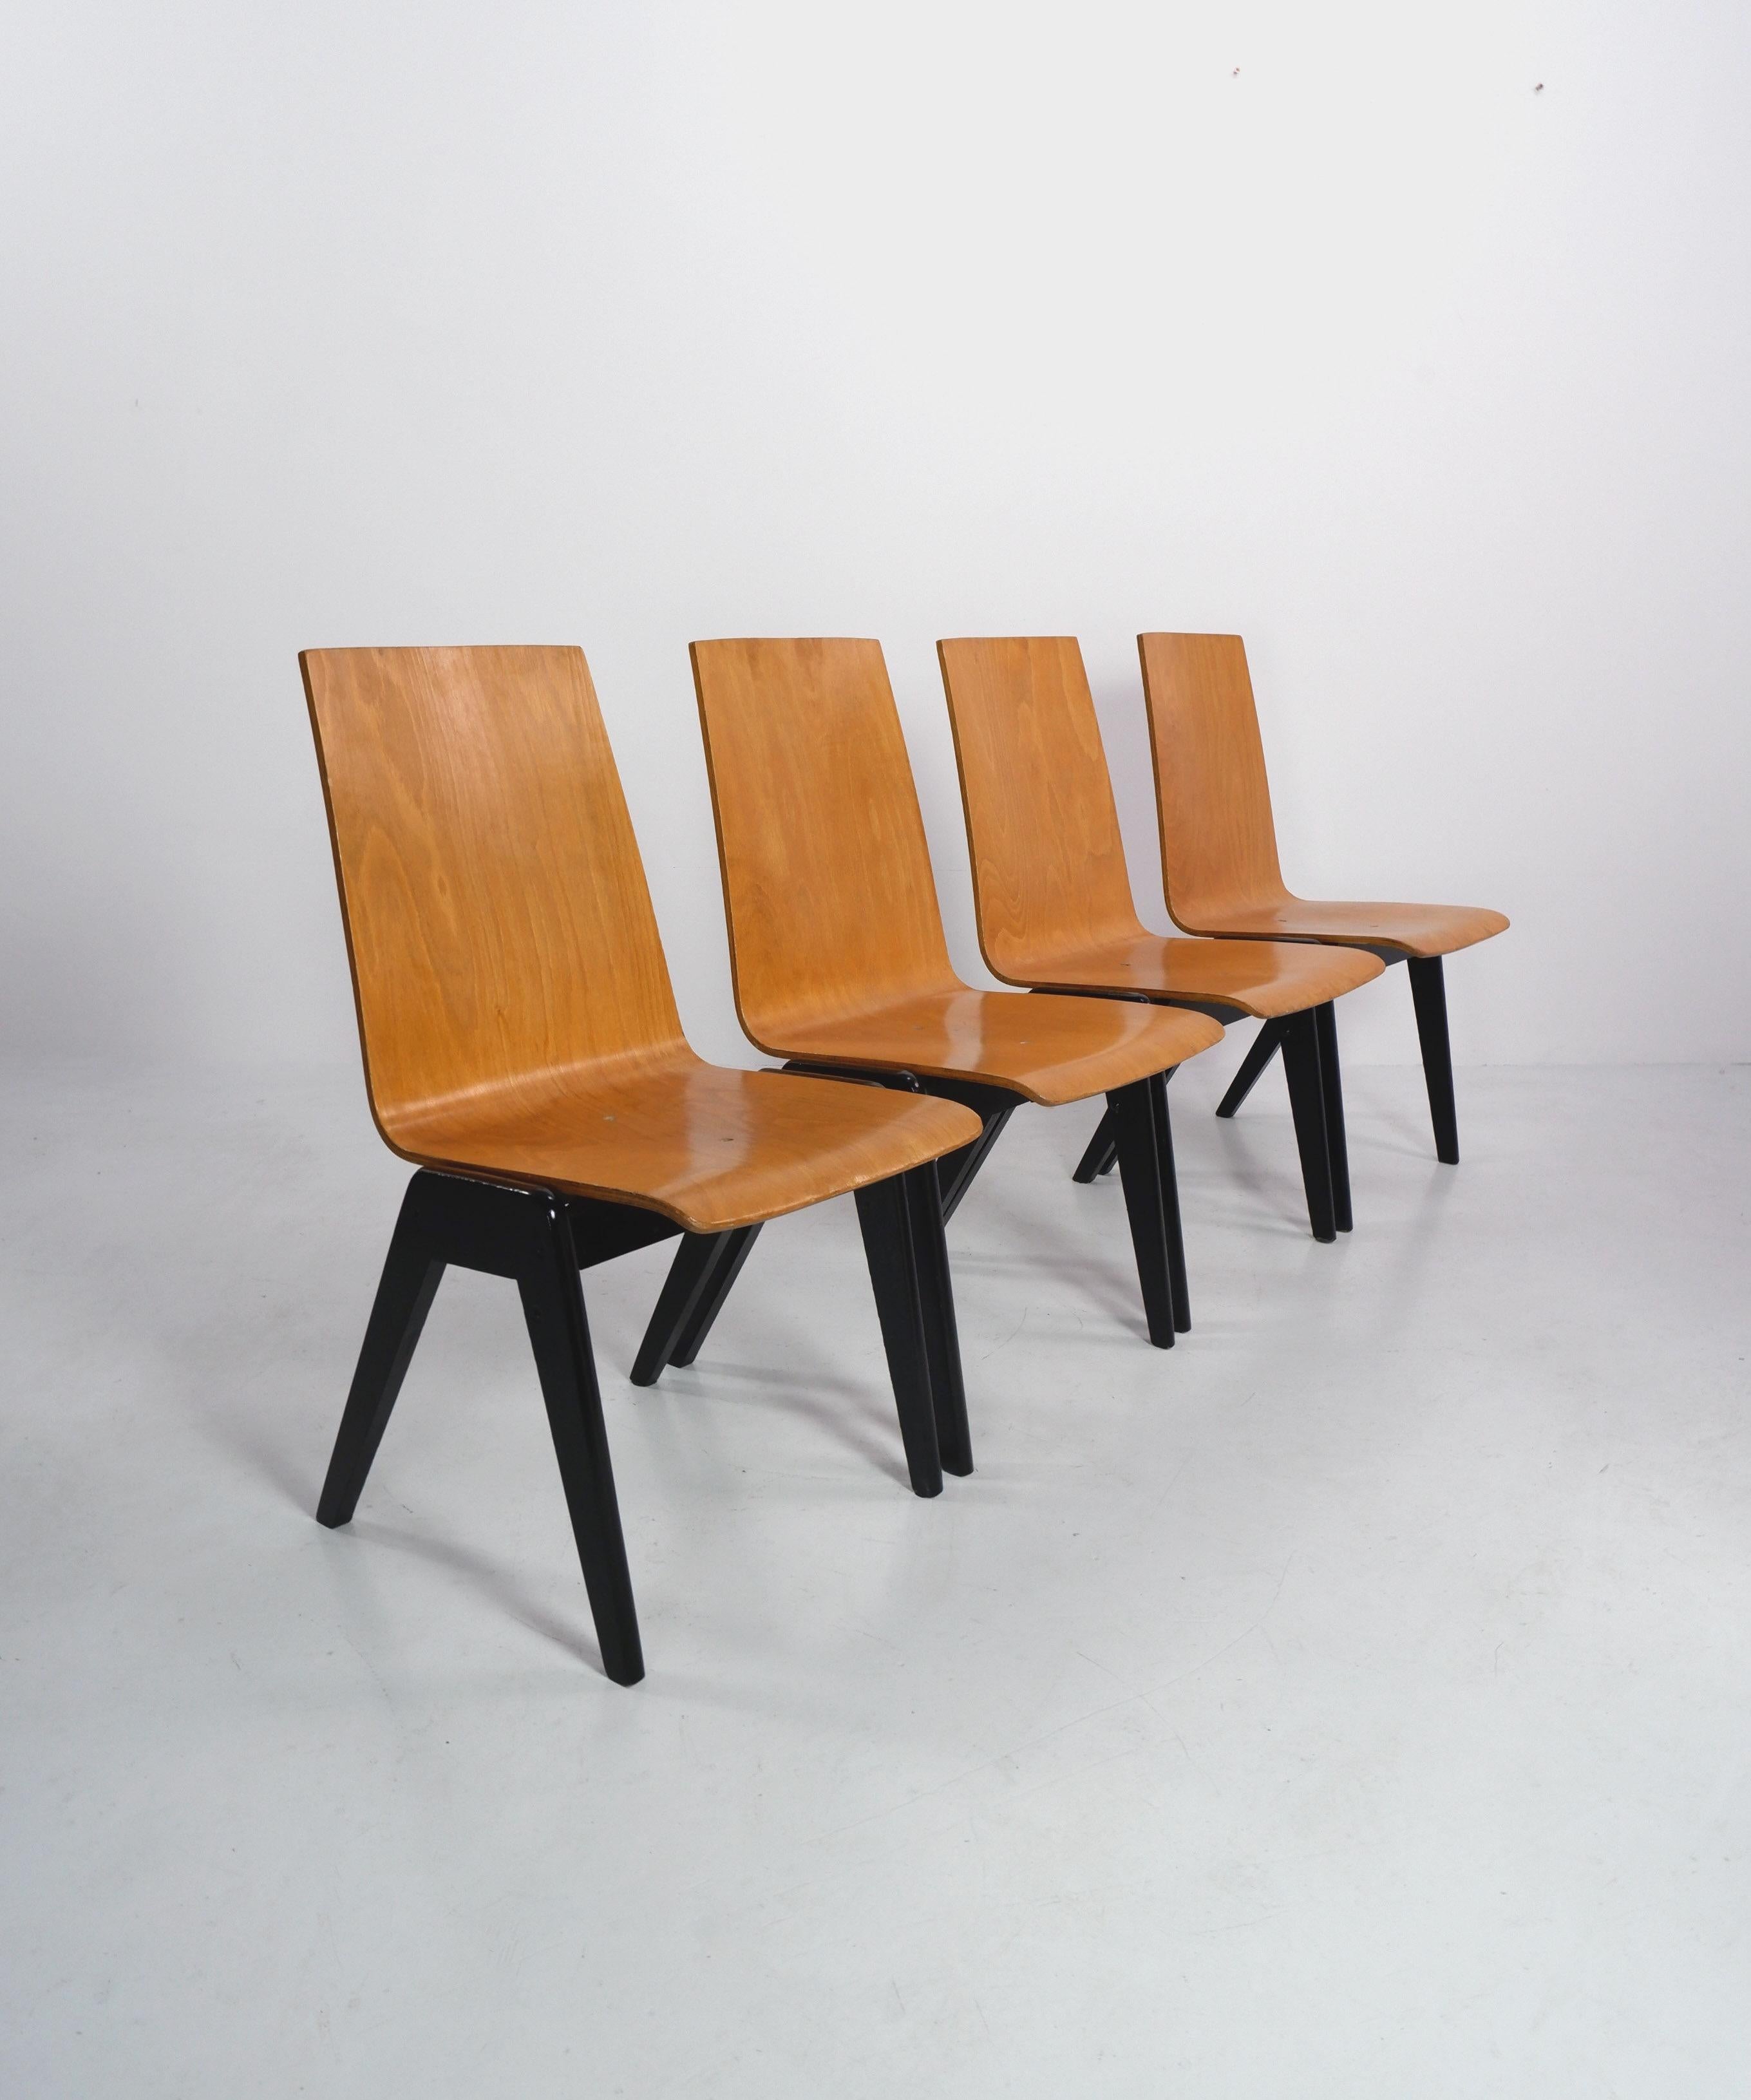 Plywood Stacking Chairs attrb. Roland Rainer, c.1950 In Good Condition For Sale In Surbiton, GB